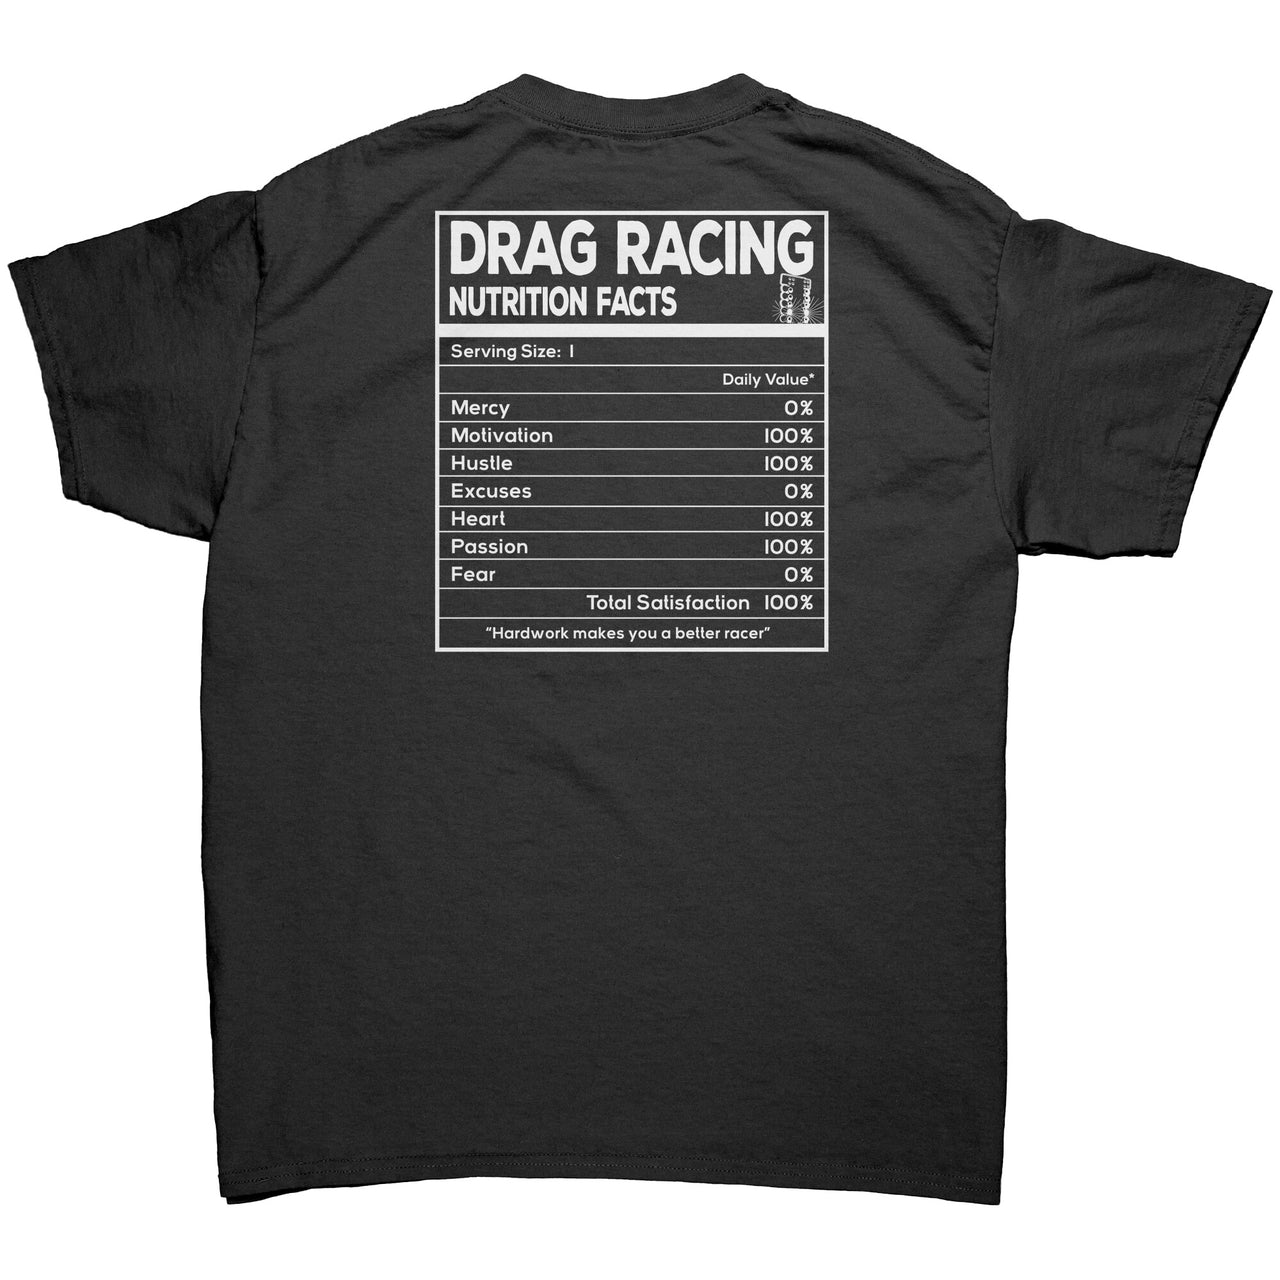 Drag Racing Nutrition Facts T-Shirts/Hoodies/Tanks